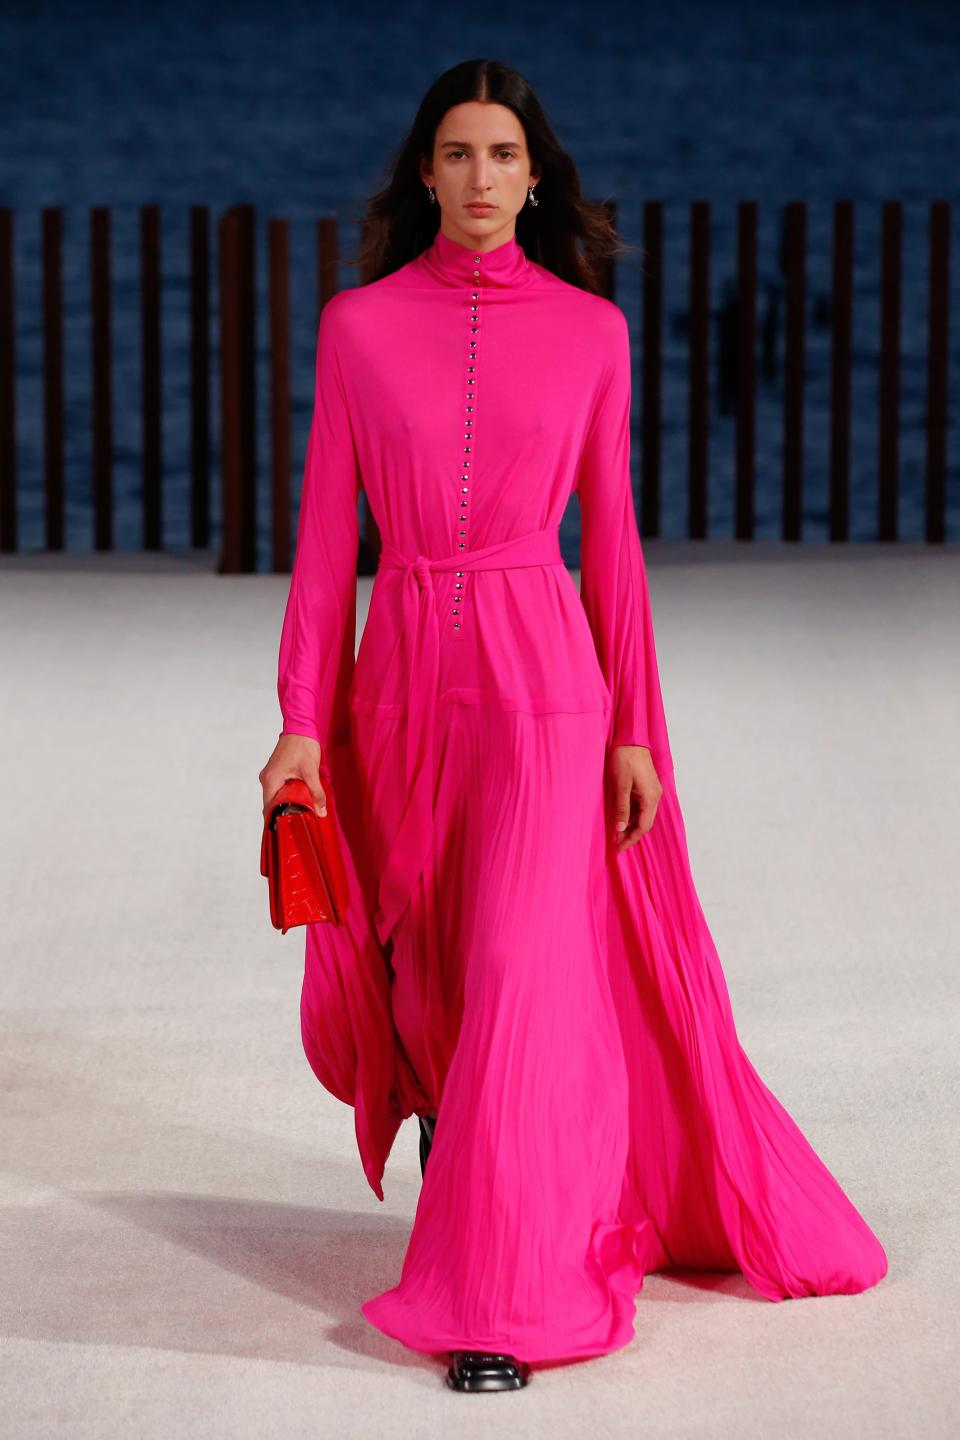 <h2>Summer 2022 Trend: Pink</h2><br>While summer will give rise to many bold color trends — see: <a href="https://www.refinery29.com/en-us/2022/03/10914993/orange-color-trend-spring-2022" rel="nofollow noopener" target="_blank" data-ylk="slk:orange" class="link ">orange</a>, <a href="https://www.refinery29.com/en-us/2022/02/10860611/copenhagen-fashion-week-neon-green-trend-fall-2022" rel="nofollow noopener" target="_blank" data-ylk="slk:neon green" class="link ">neon green</a>, and purple — pink will be <em>the</em> color of the year. For proof, see the <a href="https://www.vogue.com/fashion-shows/fall-2022-ready-to-wear/valentino" rel="nofollow noopener" target="_blank" data-ylk="slk:Valentino Fall 2022" class="link ">Valentino Fall 2022</a> show that featured monochrome fuchsia looks, as well as the <a href="https://www.refinery29.com/en-us/grammys-2022-red-carpet-style" rel="nofollow noopener" target="_blank" data-ylk="slk:Grammys 2022 red carpet" class="link ">Grammys 2022 red carpet</a>, where celebrities like Saweetie, Billy Porter, and even Travis Barker wore various shades of the bold hue.<span class="copyright">Photo: Jonas Gustavsson</span>